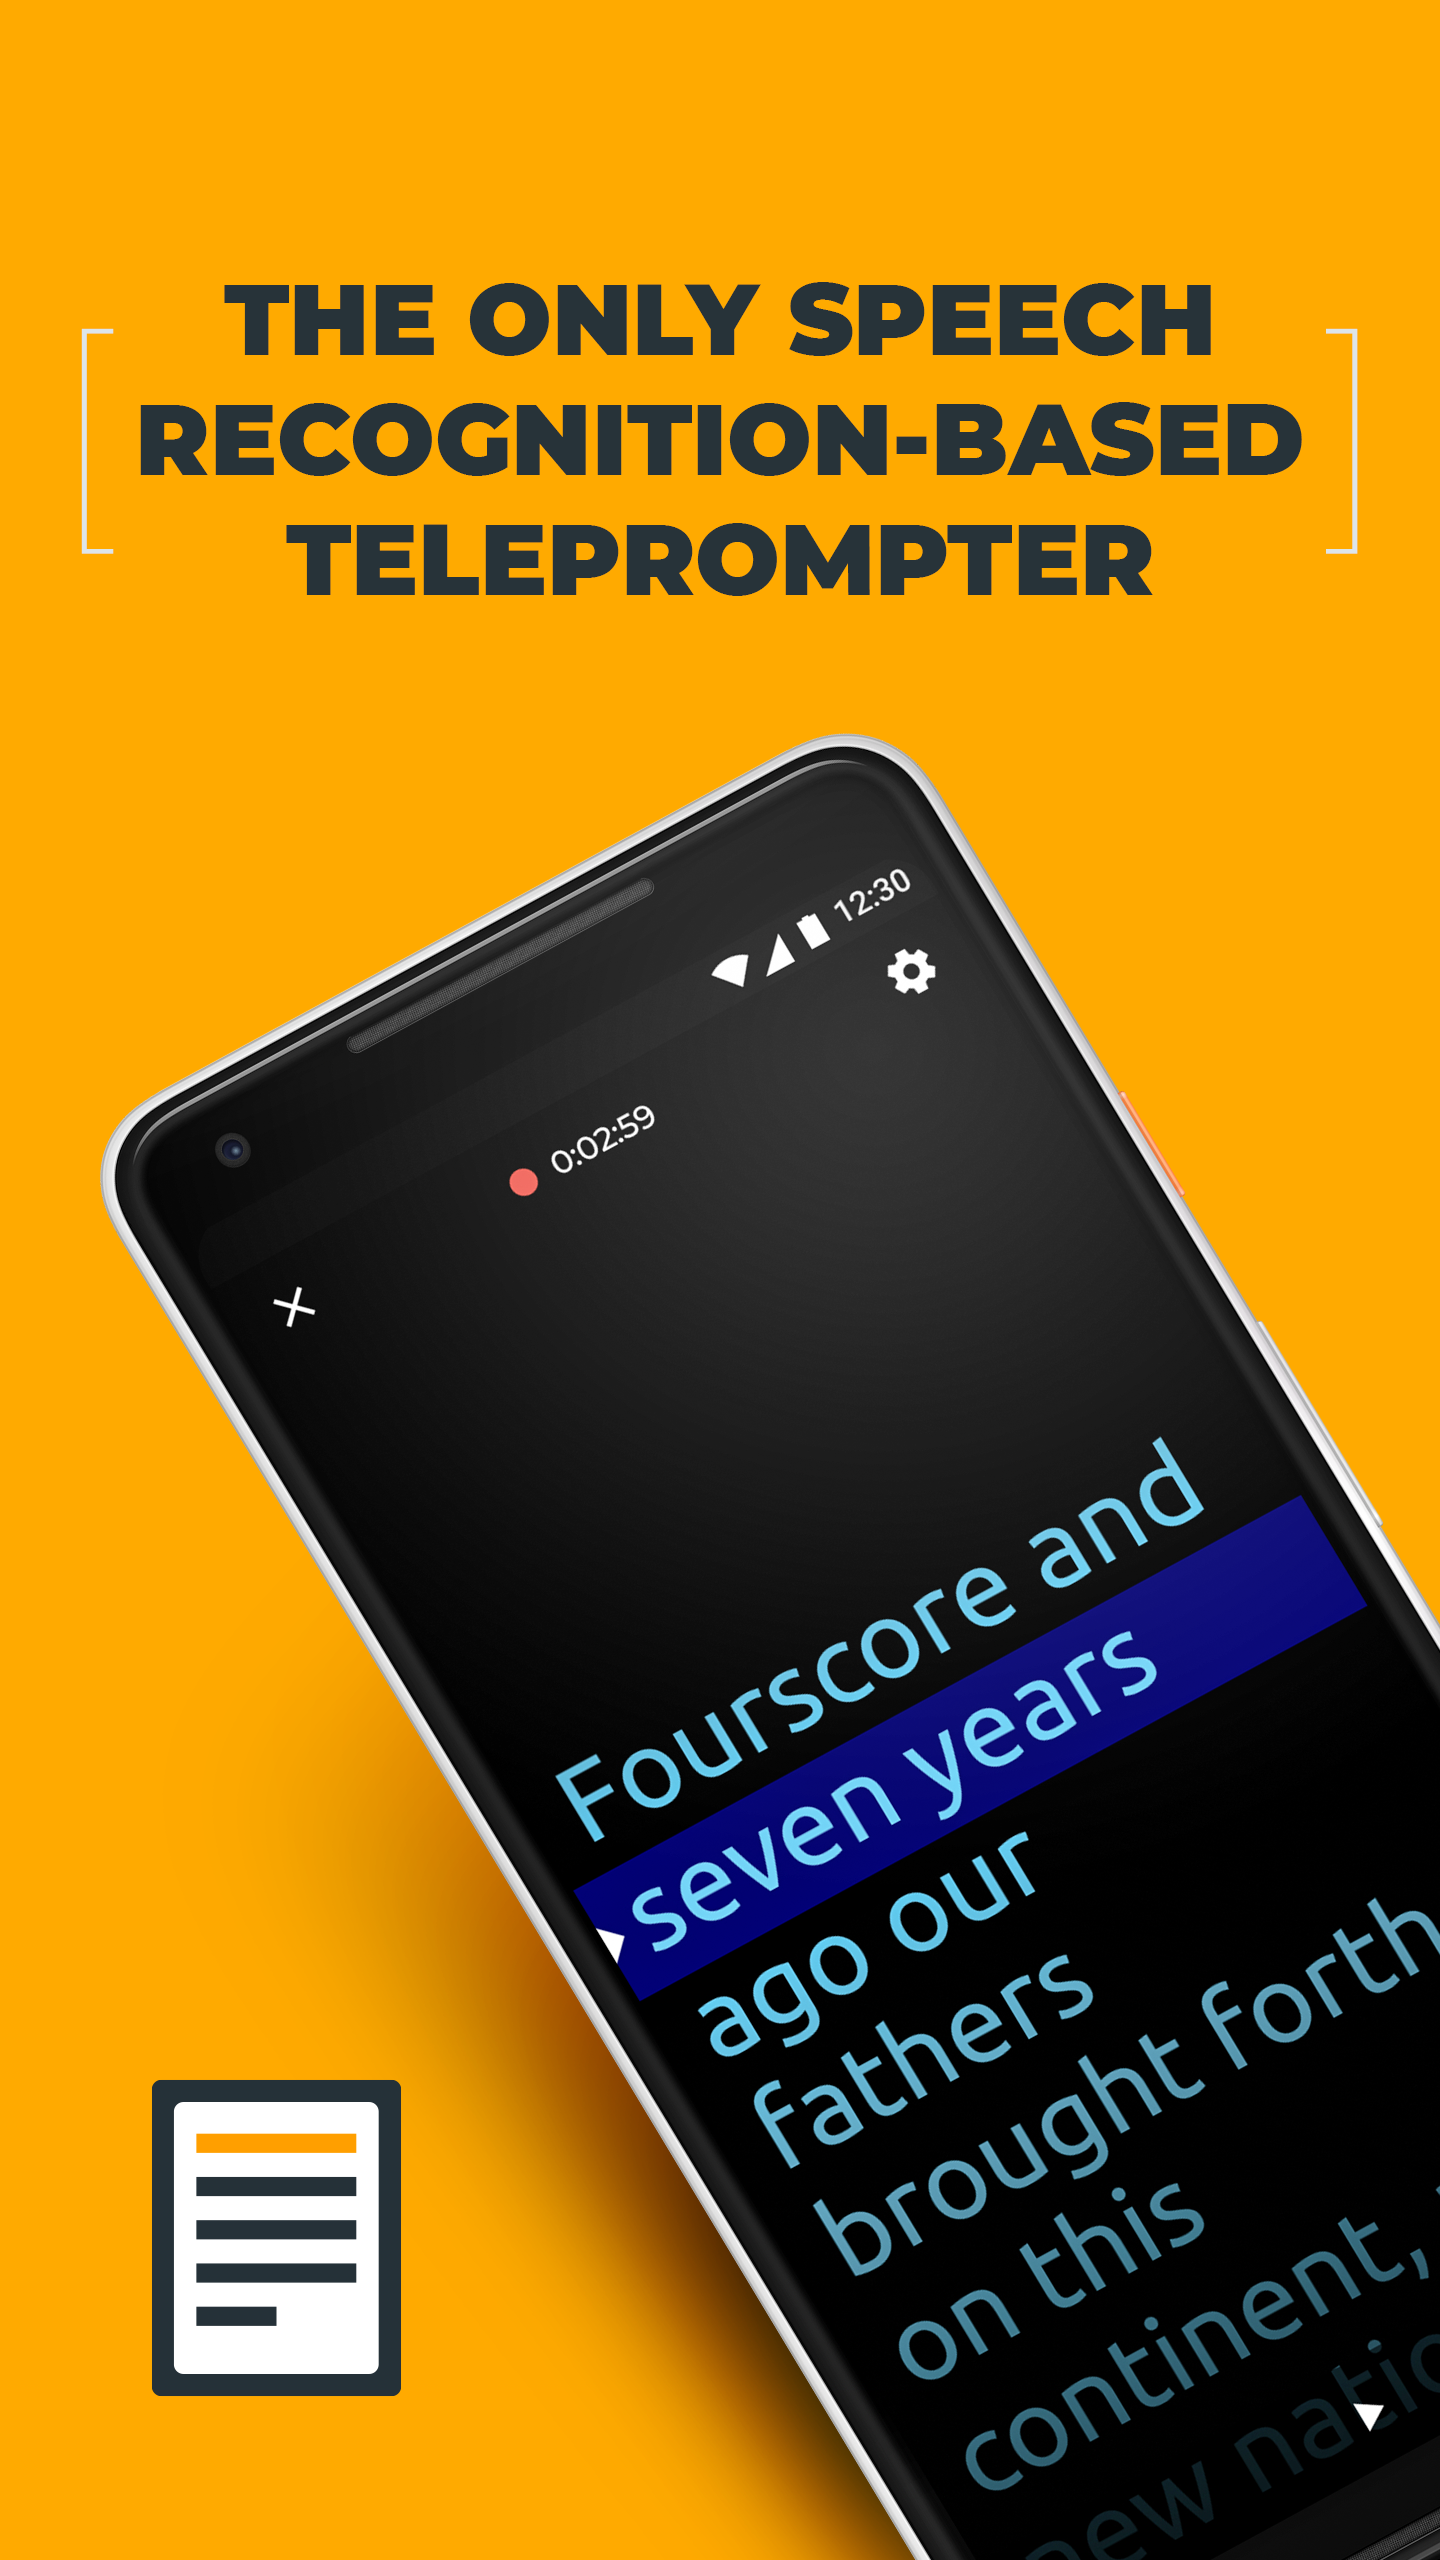 teleprompter app for android and kindle